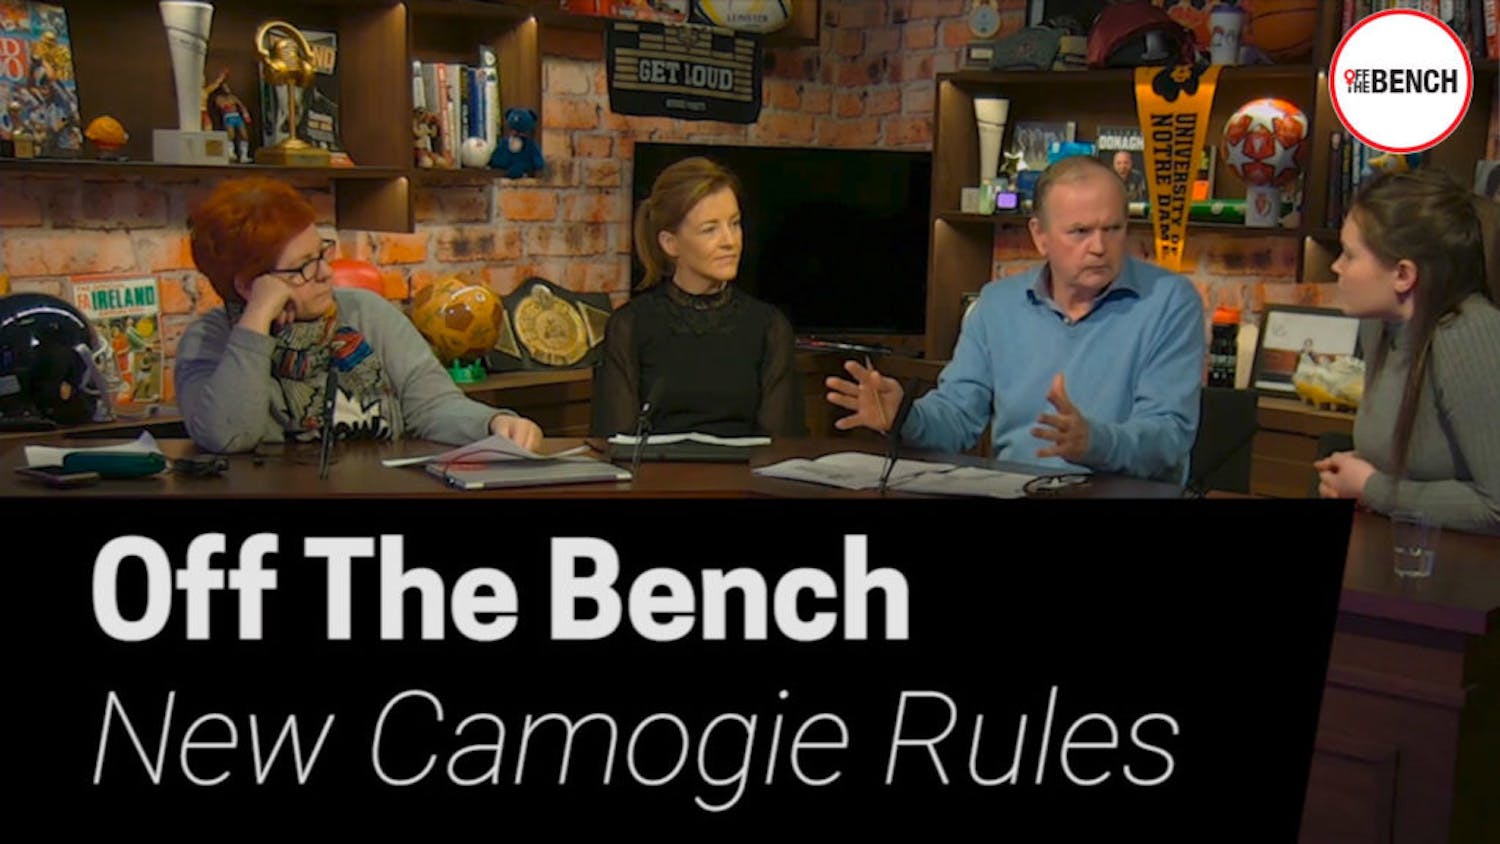 New Camogie Rules | What's the story?